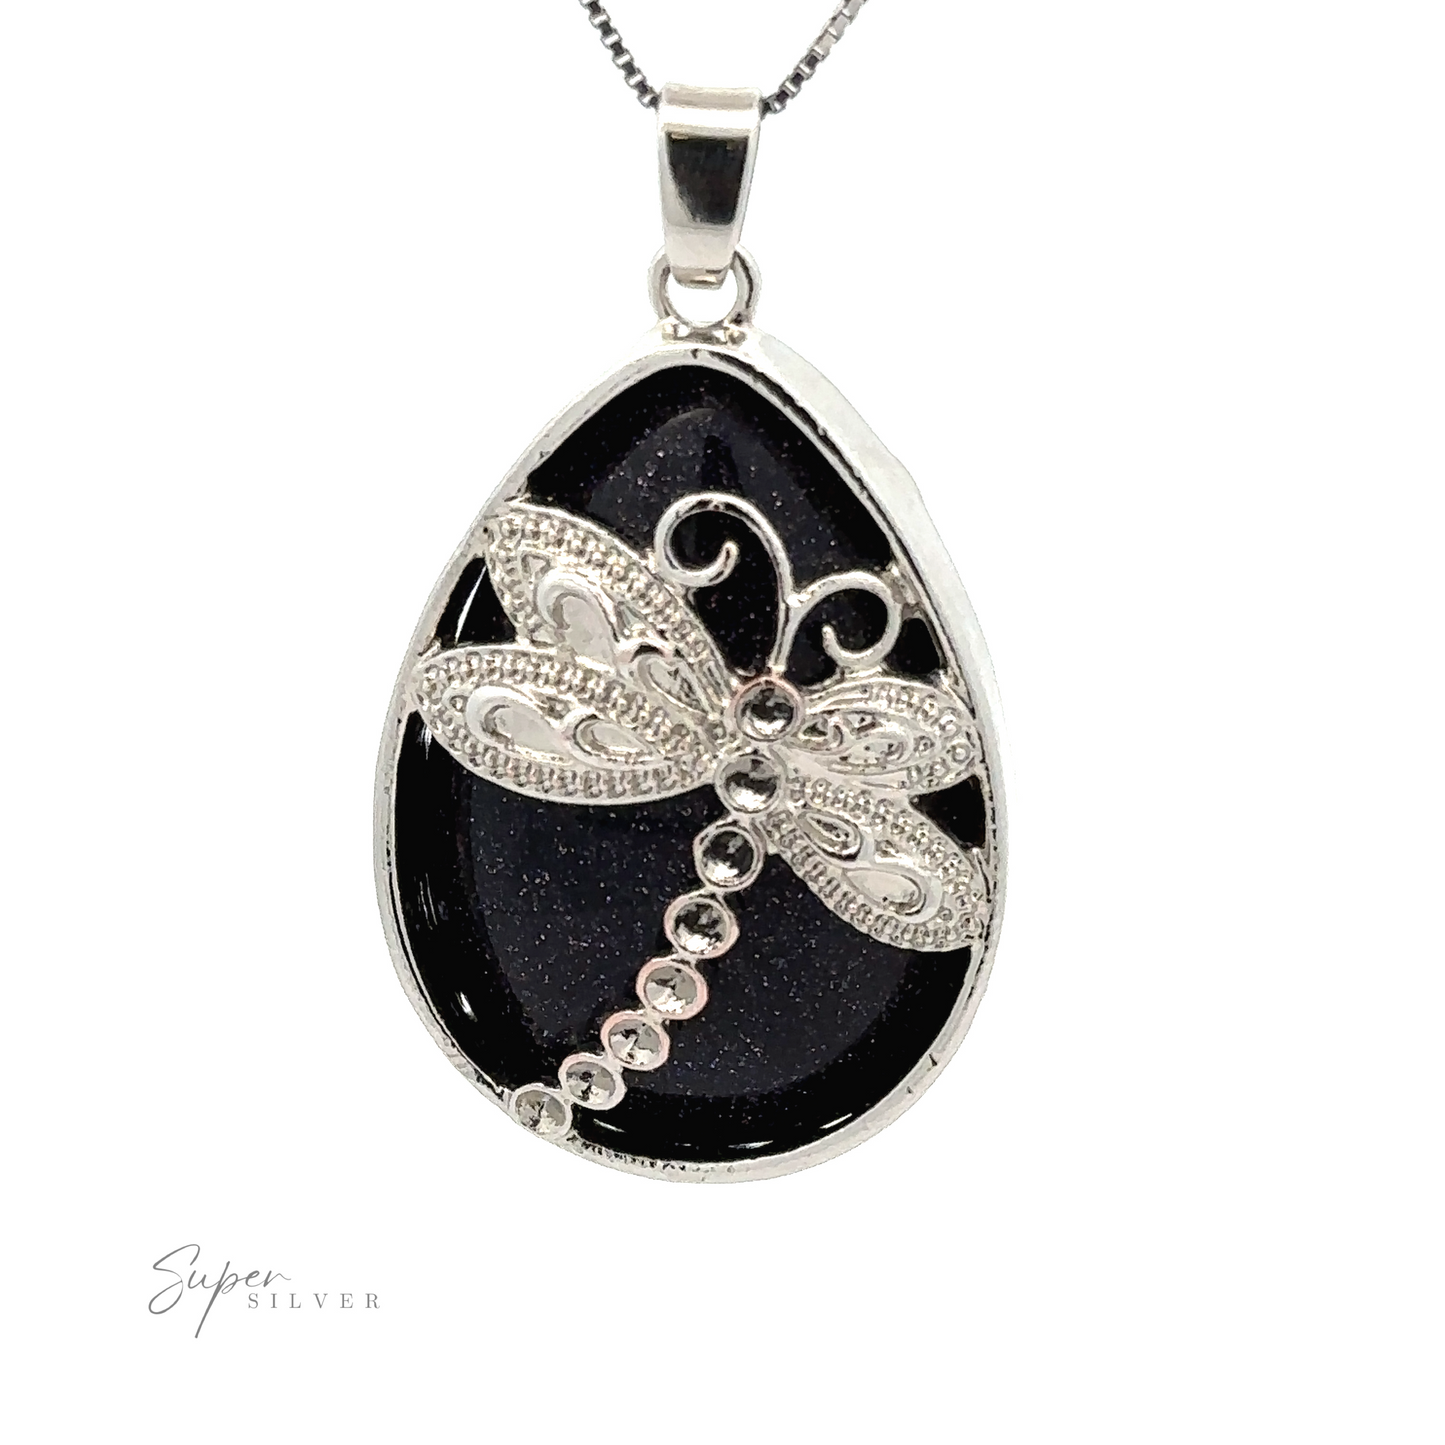 
                  
                    A Teardrop Stone pendant with Dragonfly with a silver dragonfly design on a dark, glittery background, with an Amethyst stone embedded at the top, and suspended from a thin mixed metals chain. The word "Super Silver" is visible in the lower left corner.
                  
                